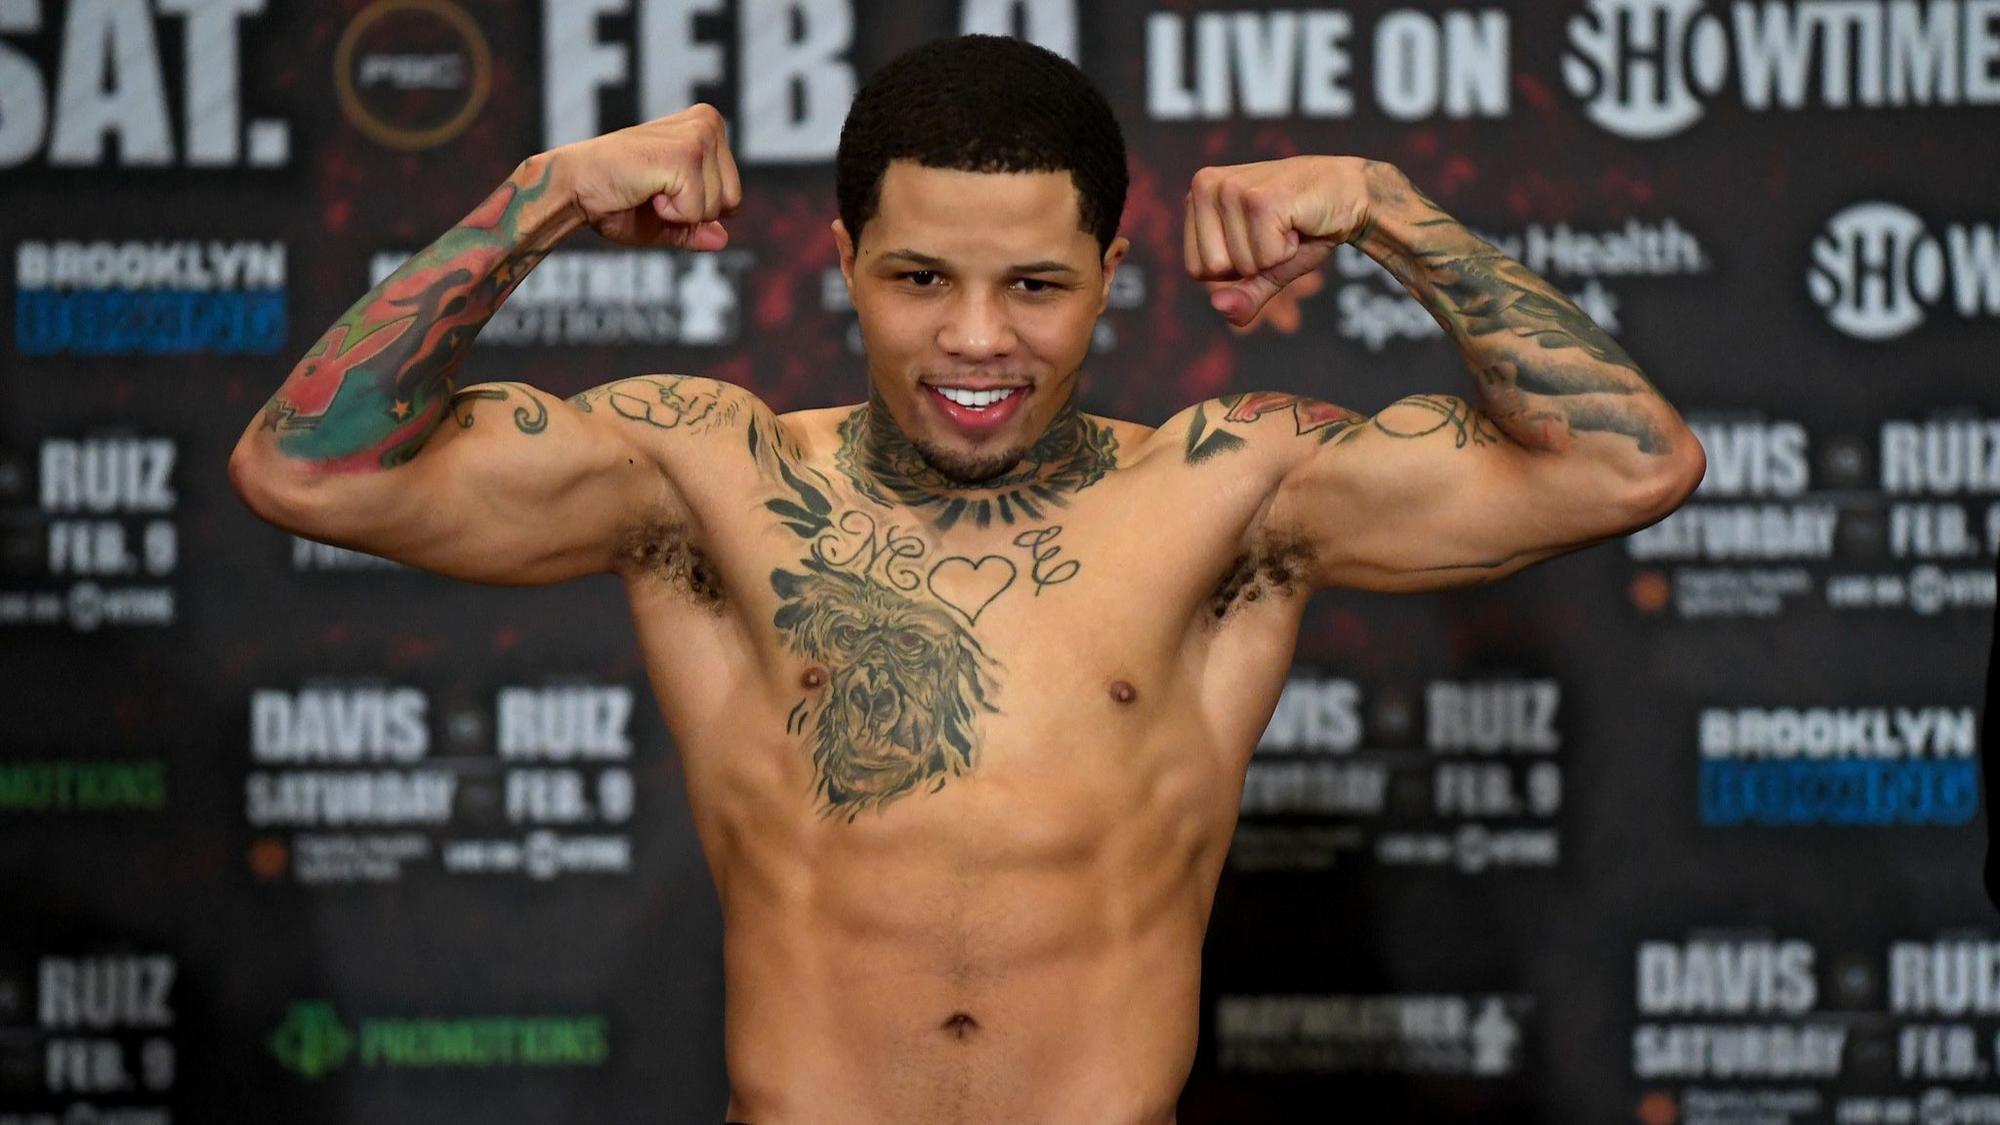 Boxer Gervonta Davis to defend super featherweight title in hometown of Baltimore on July 27, team says